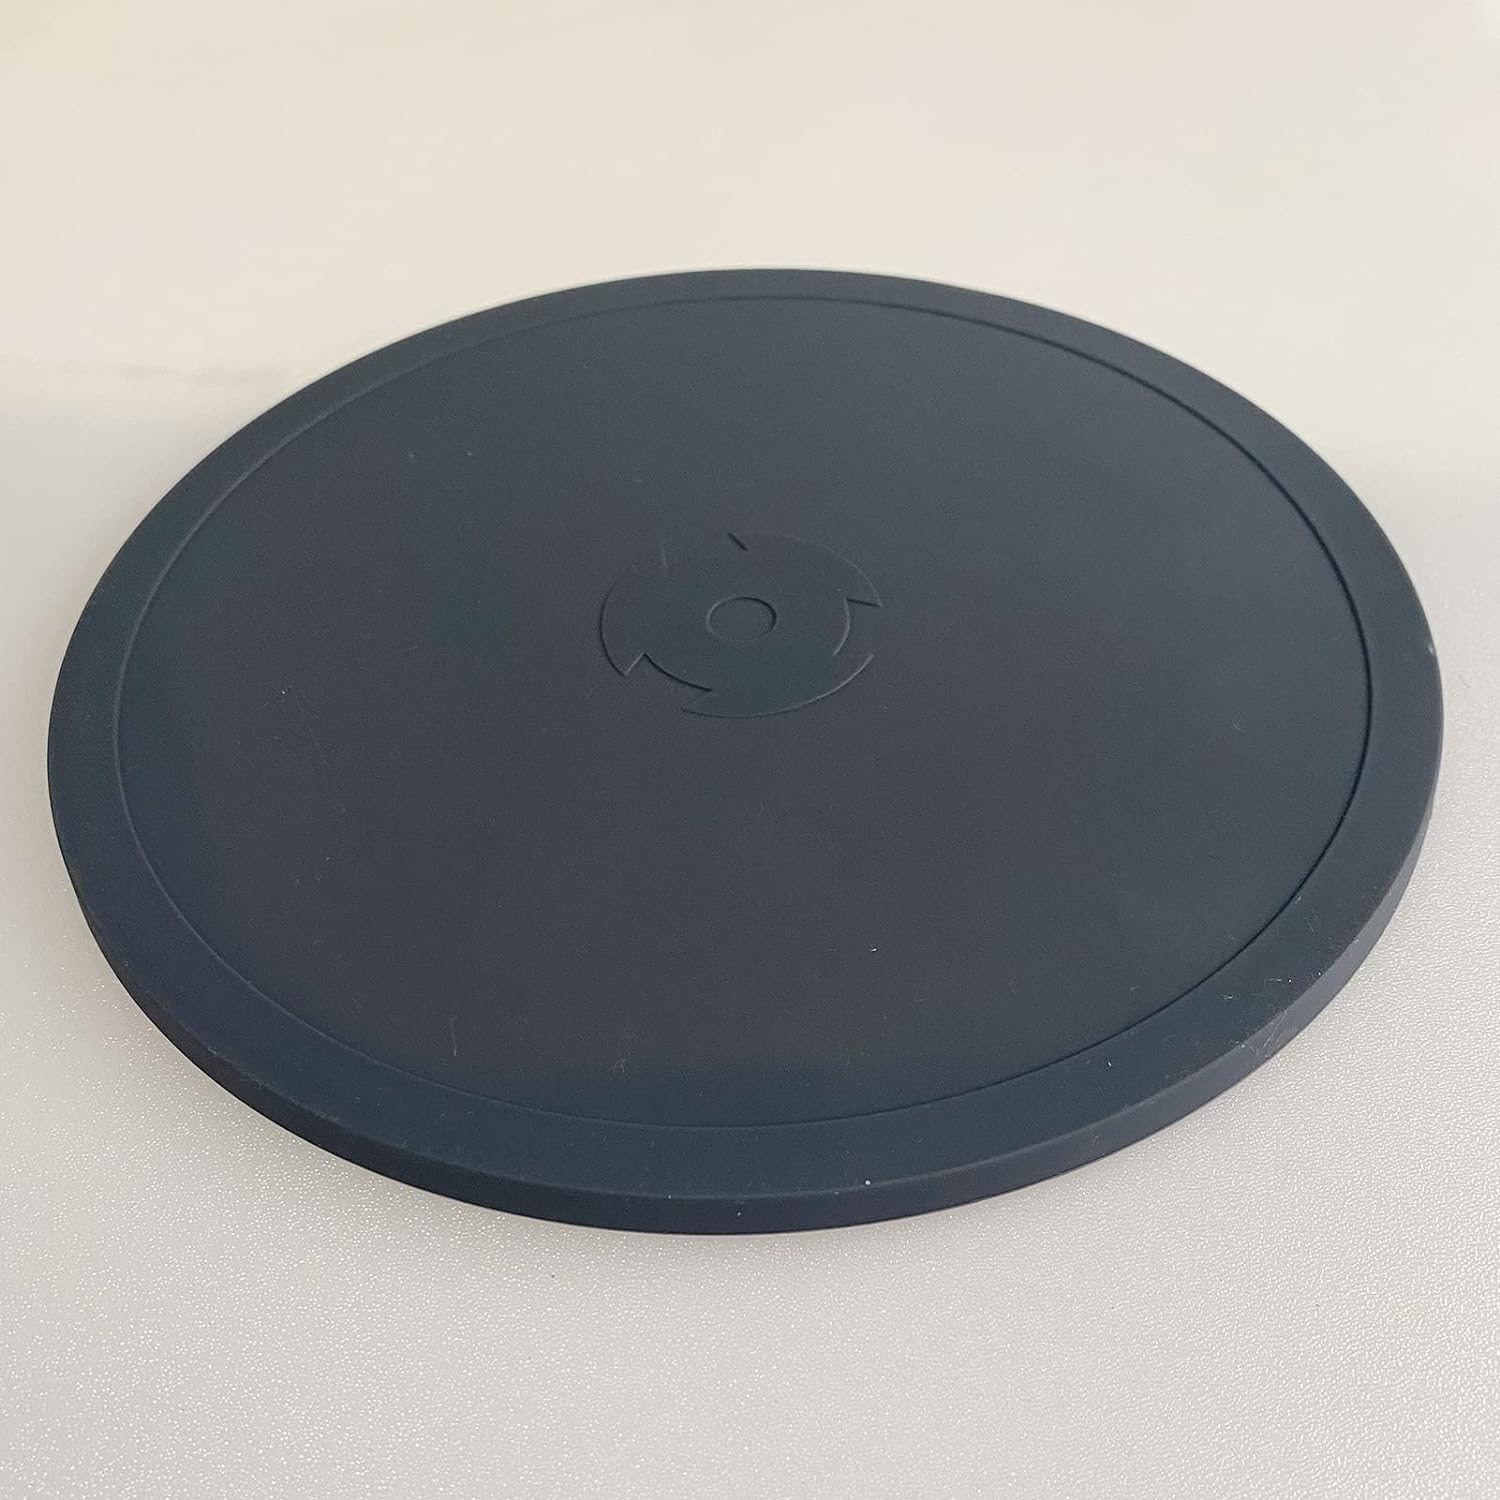 Food Grade Silicone Lid Sealing Fermentation Cover for Vitamix Thermomix TM31/TM5/TM6,Kitchen Accessory, Easy to Clean, Simple Installation